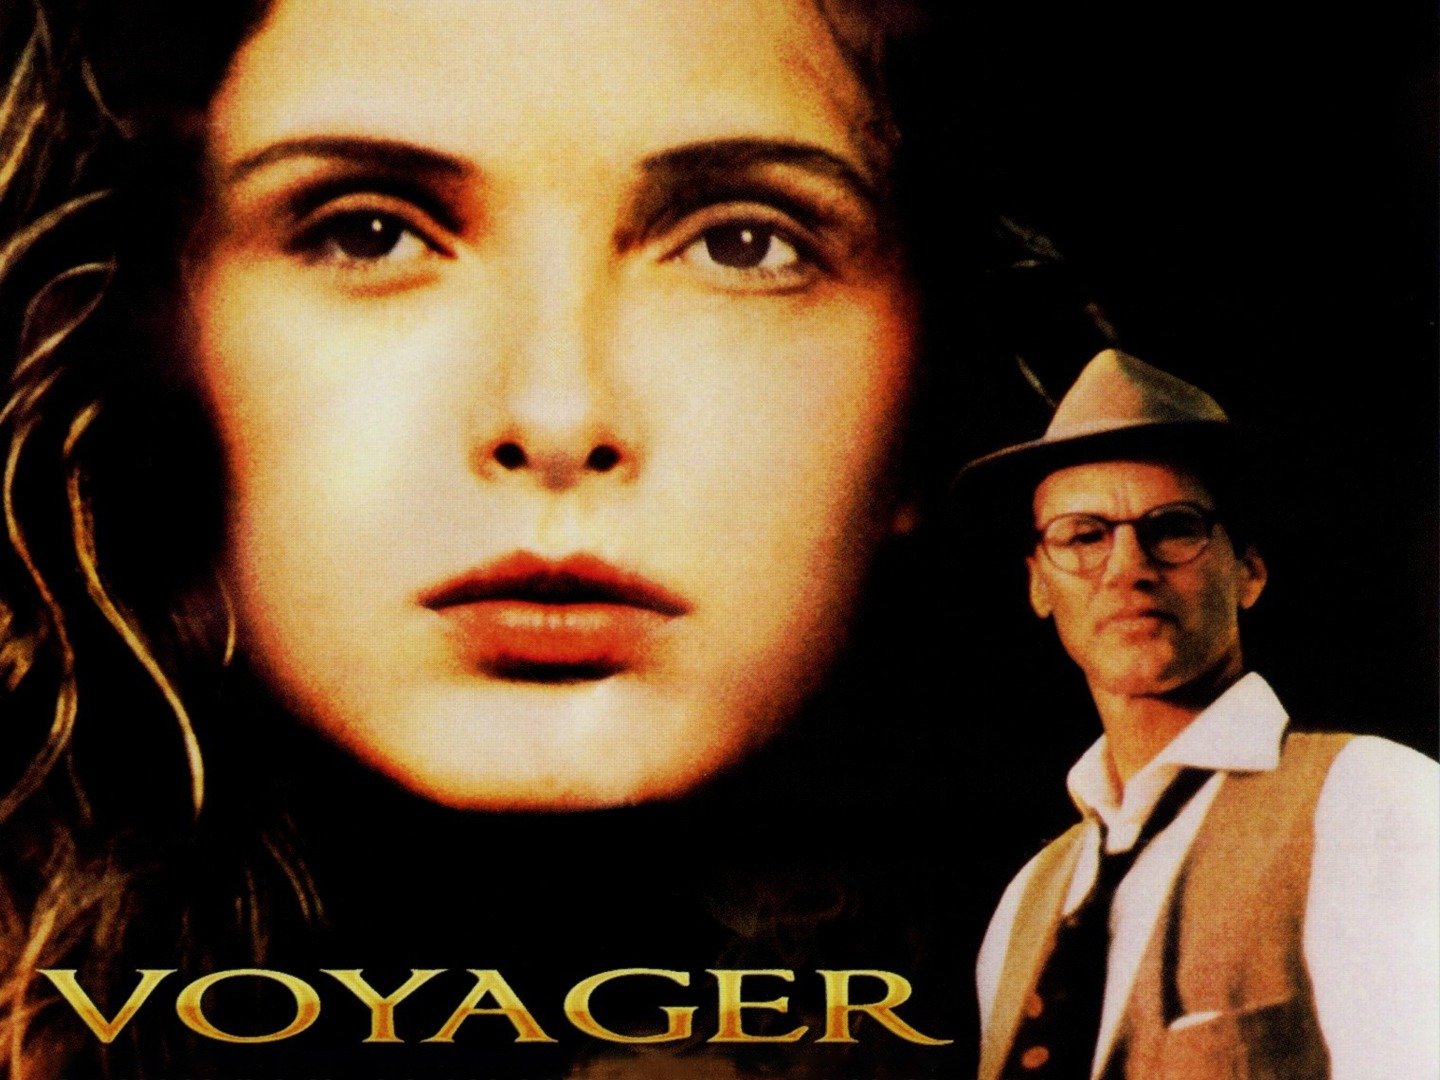 movies on voyager 1